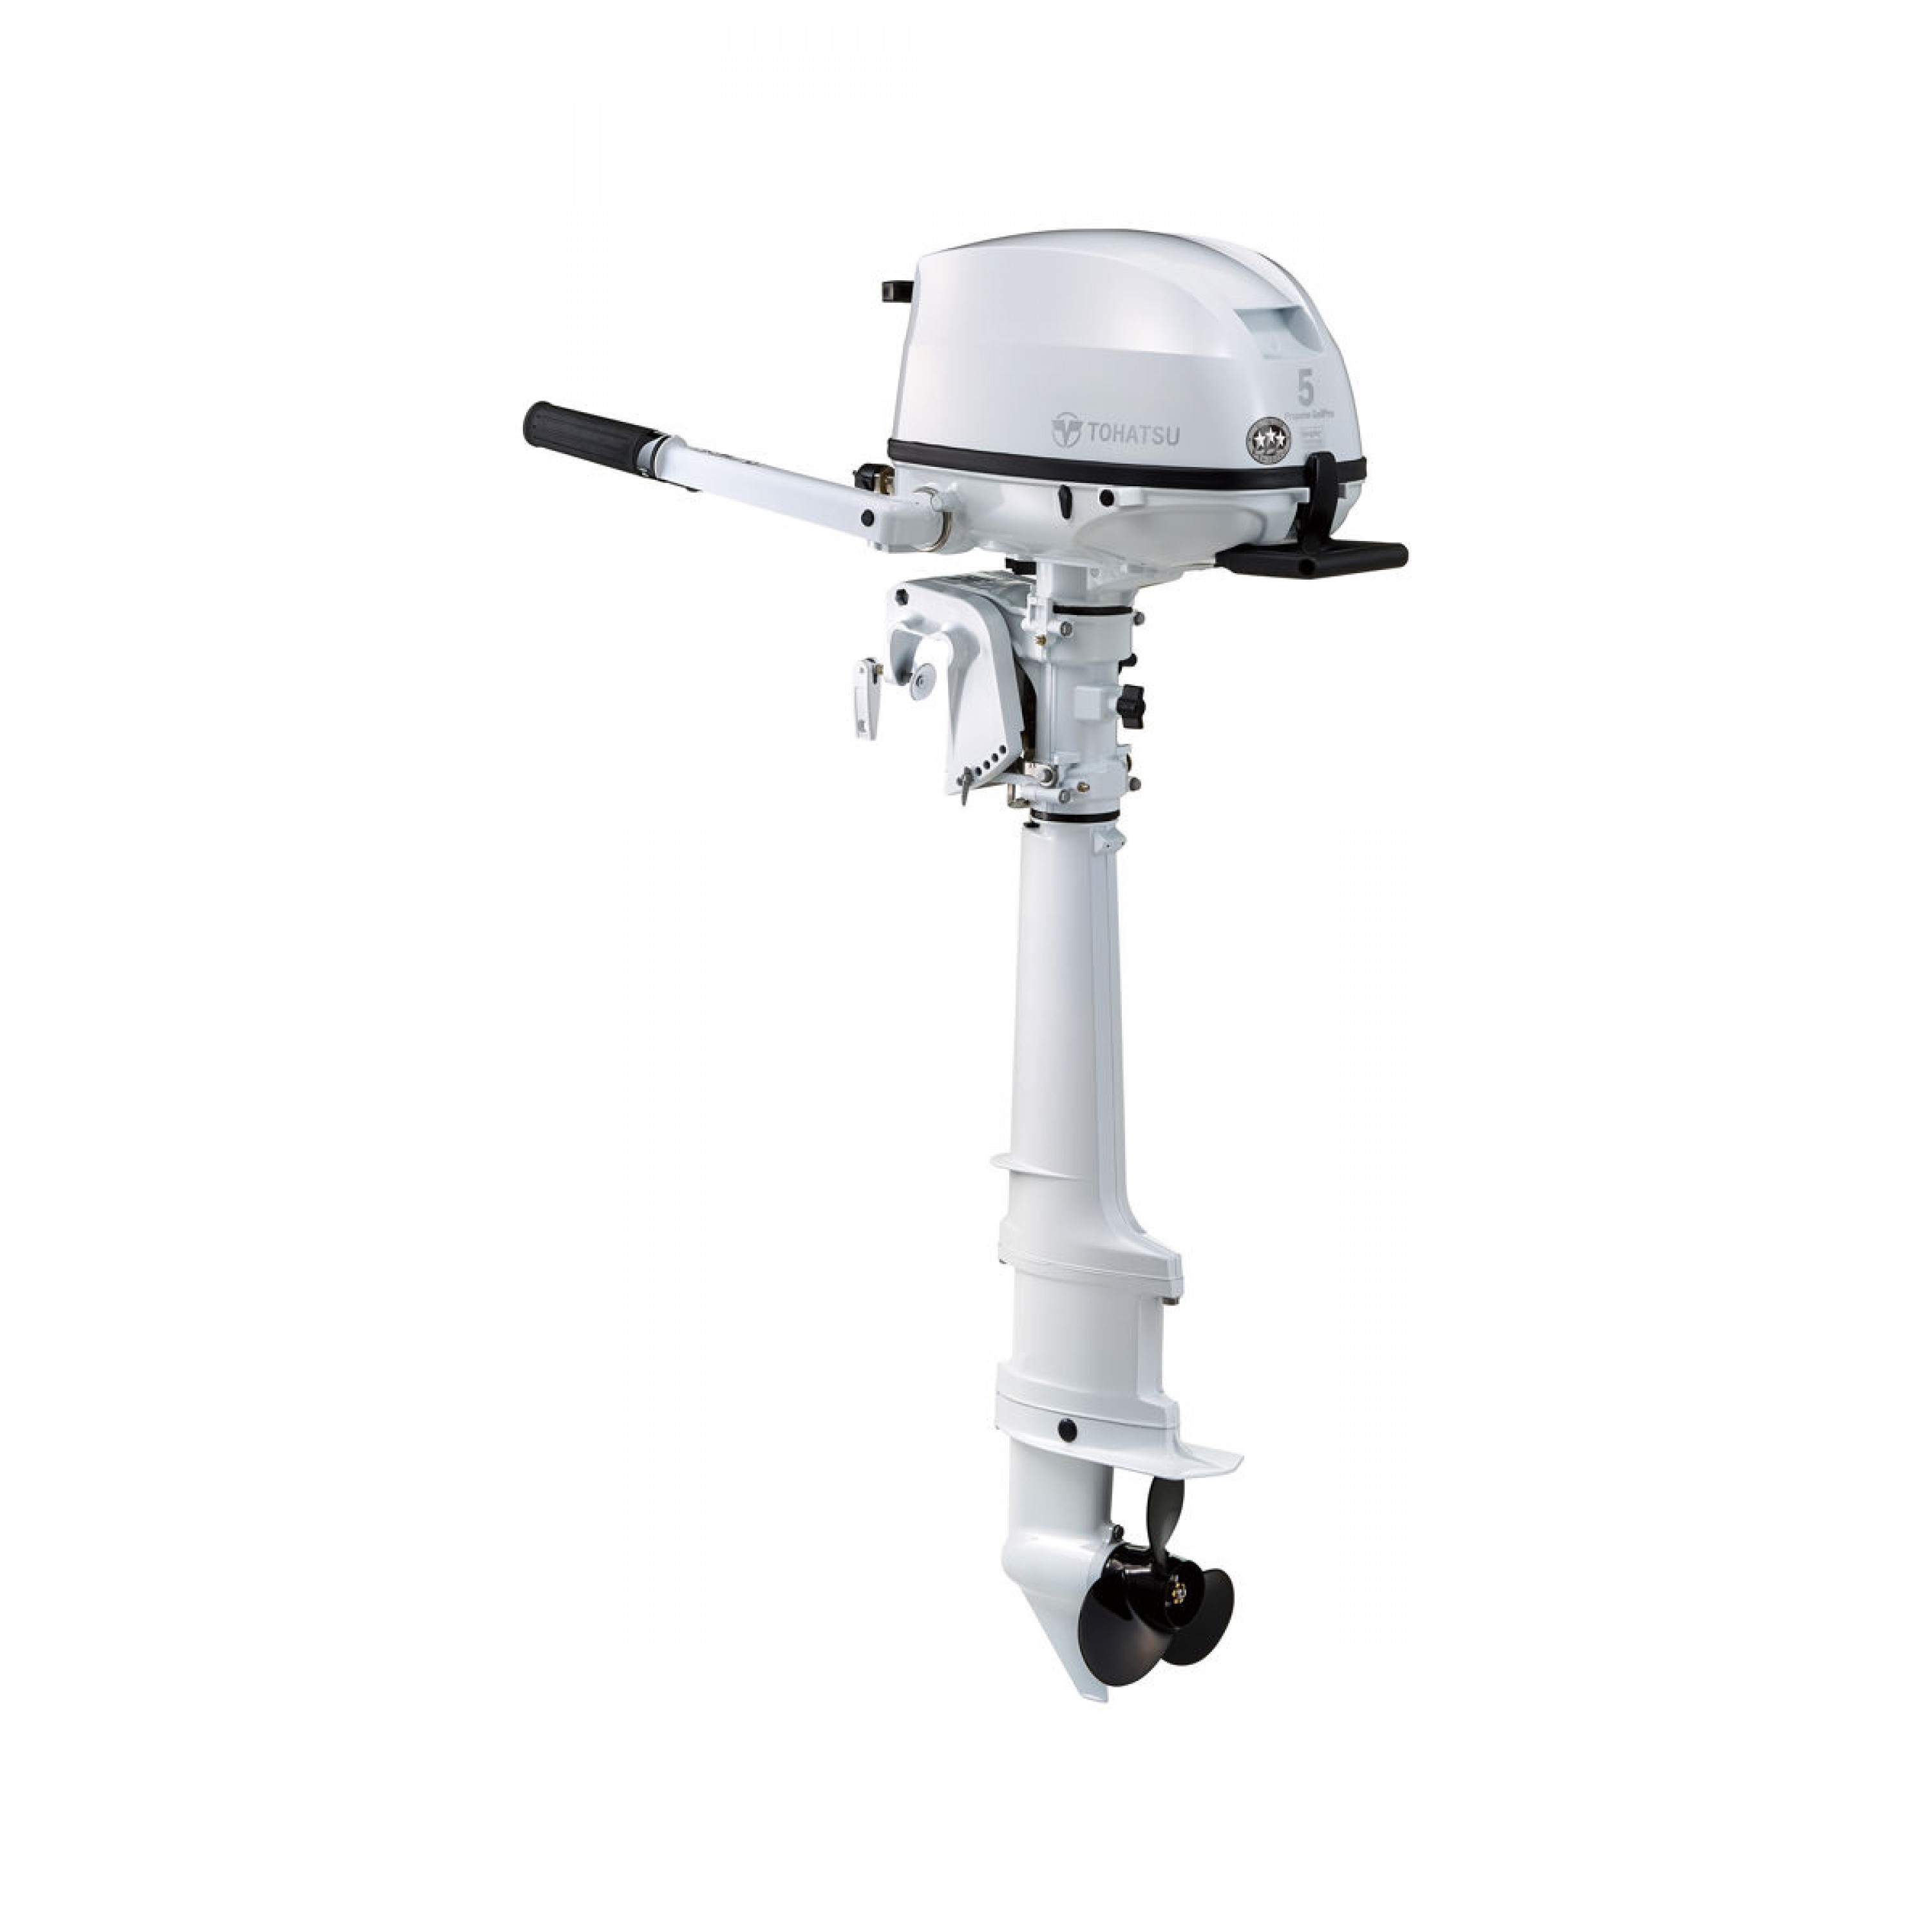 5 HP, TOHATSU OUTBOARD, MFS5DLPGSPROL (White)  (includes LPG tank), WHITE, CARB, 20, TILLER, LPG TANK INC, MANUAL START, 12v CHARGE